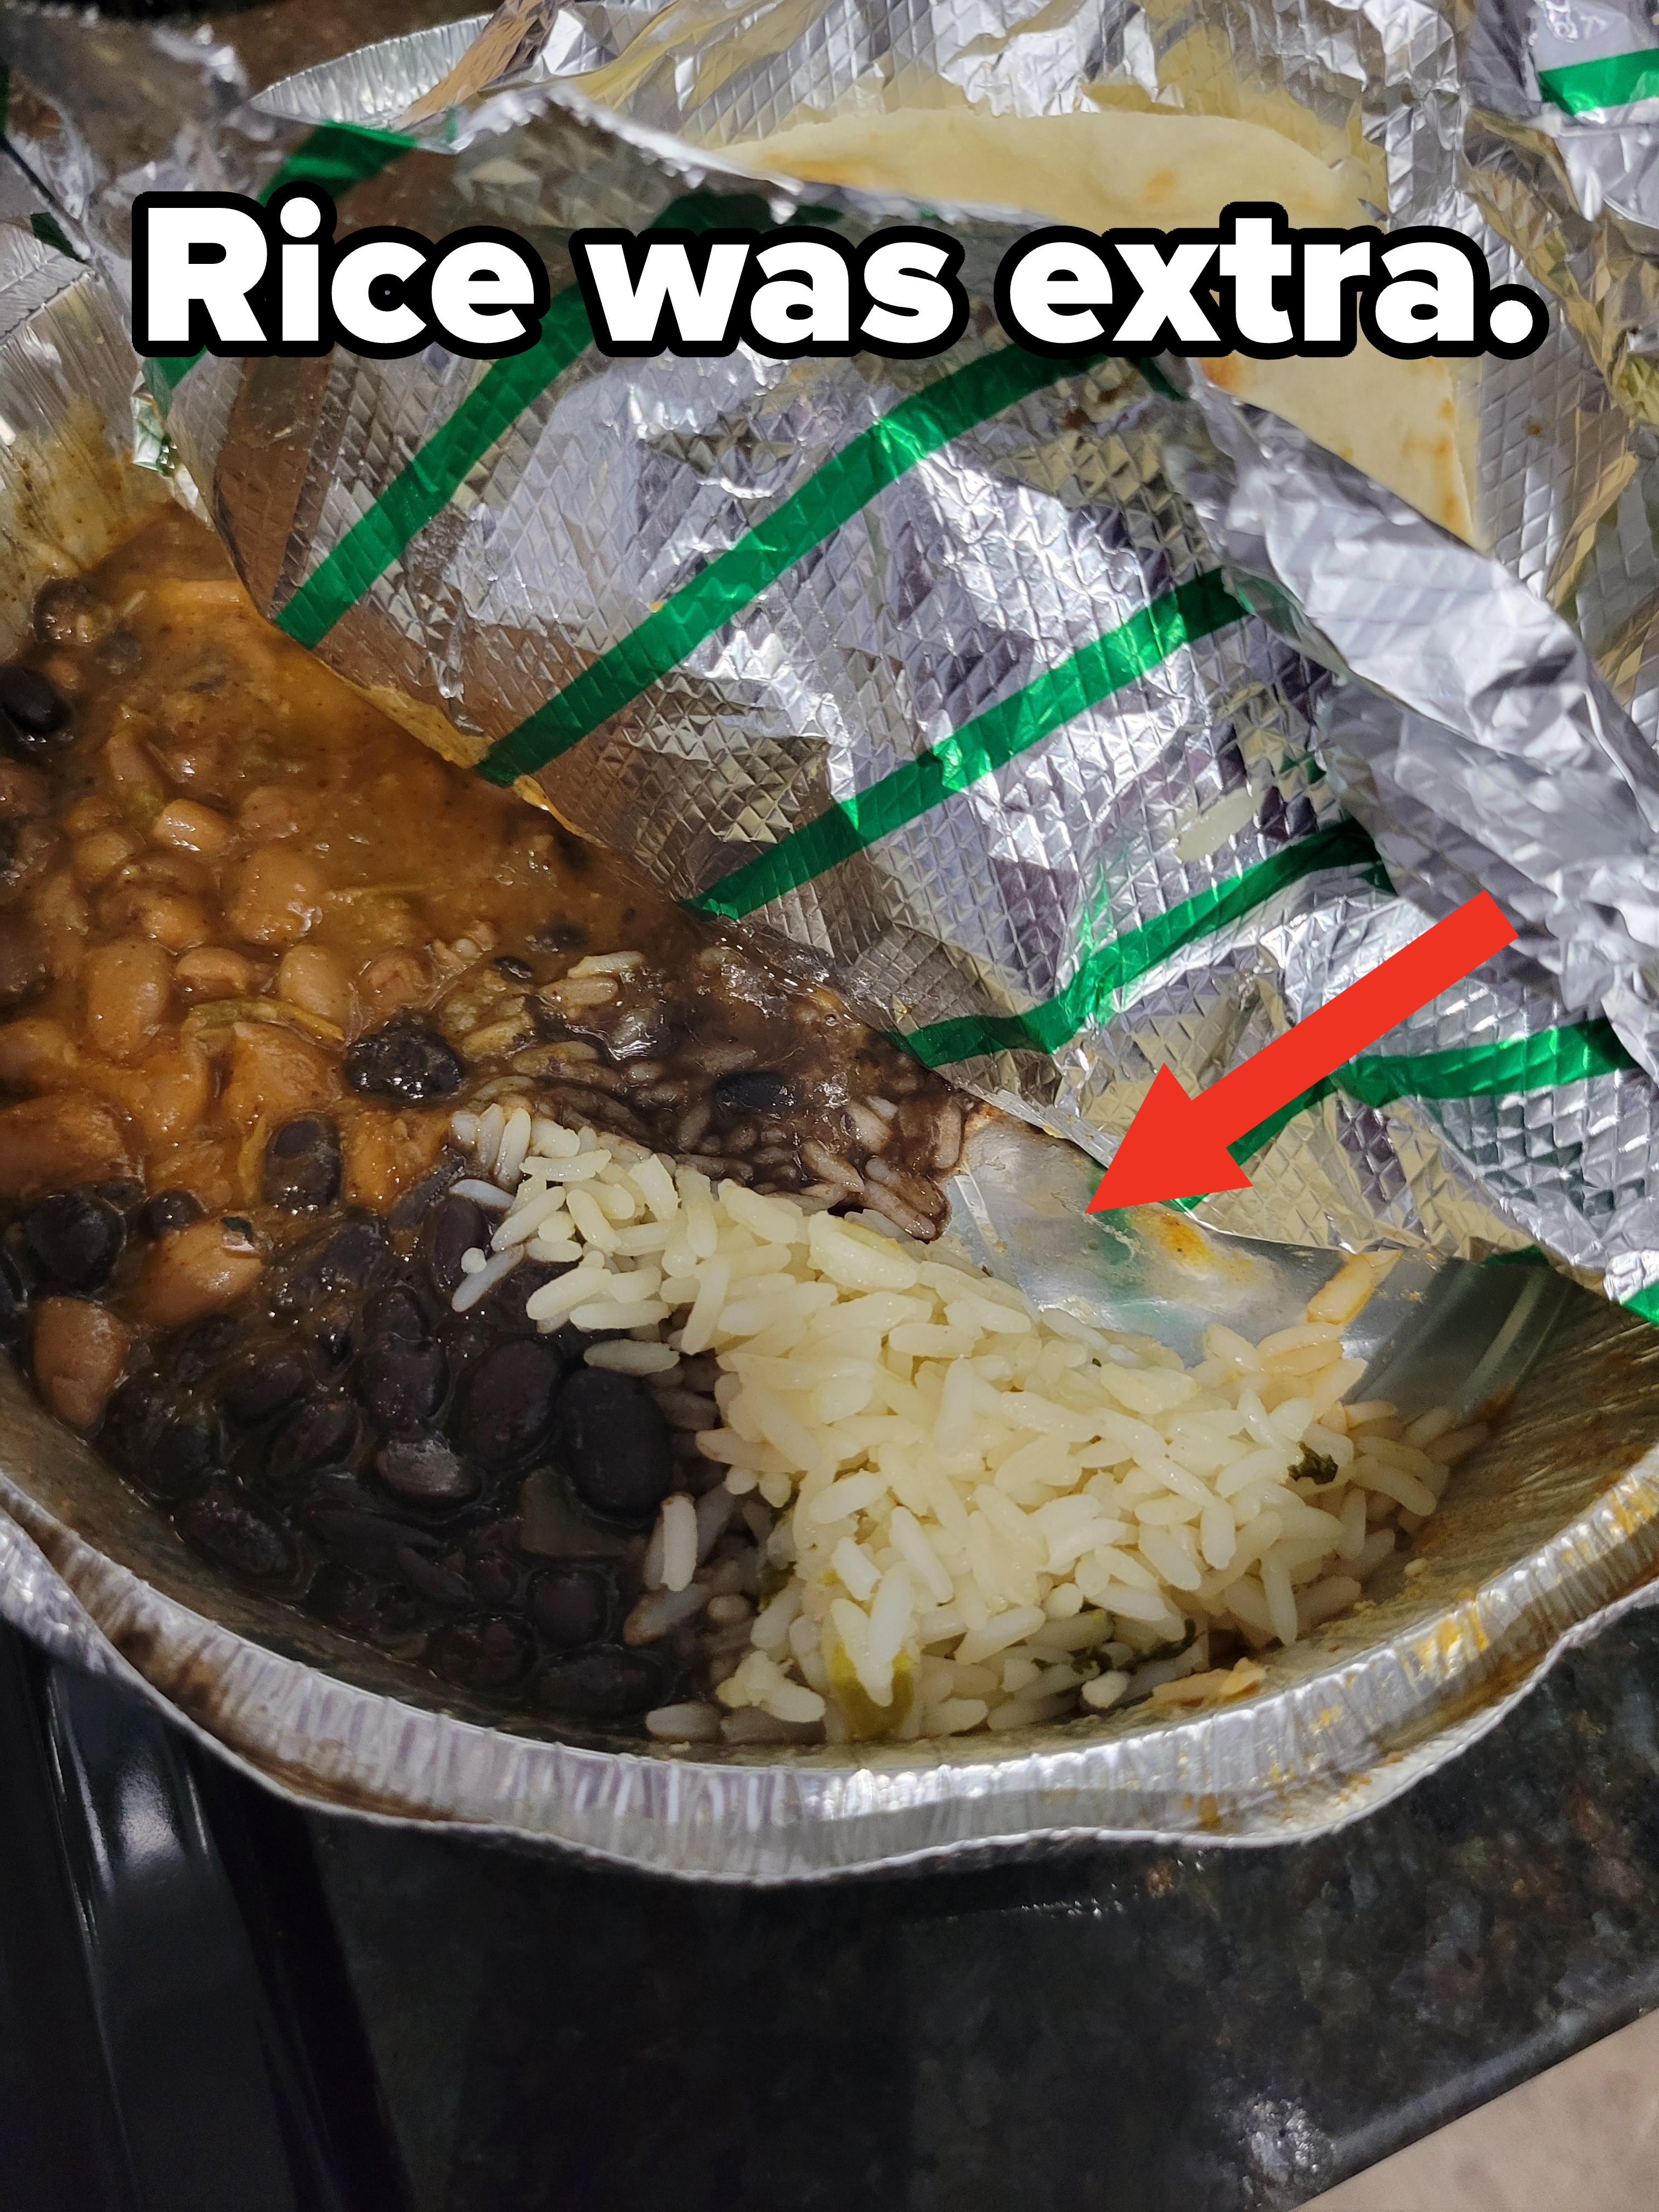 &quot;Rice was extra&quot;